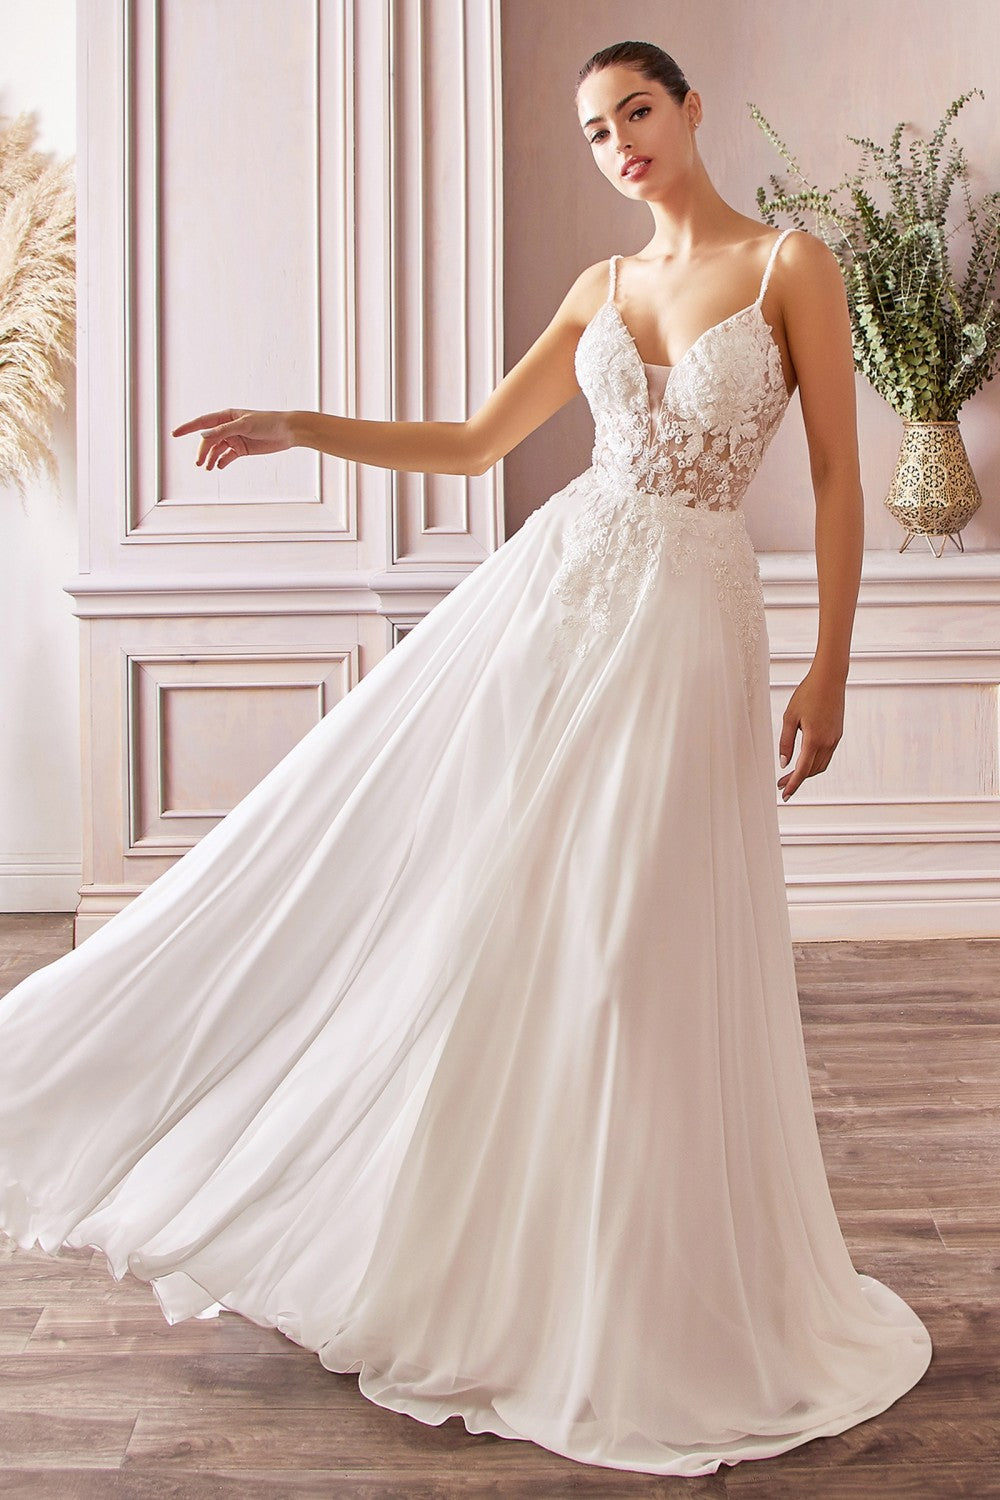 This feminine silhouette is captured and defined by a delicately embroidered and beaded bodice and sweeping satin A-line skirt. The gown features a sheer tulle bodice with internal boning that hugs your figure to ensure a supportive and comfortable fit, illusion mesh at the v-neckline and narrow embellished straps.